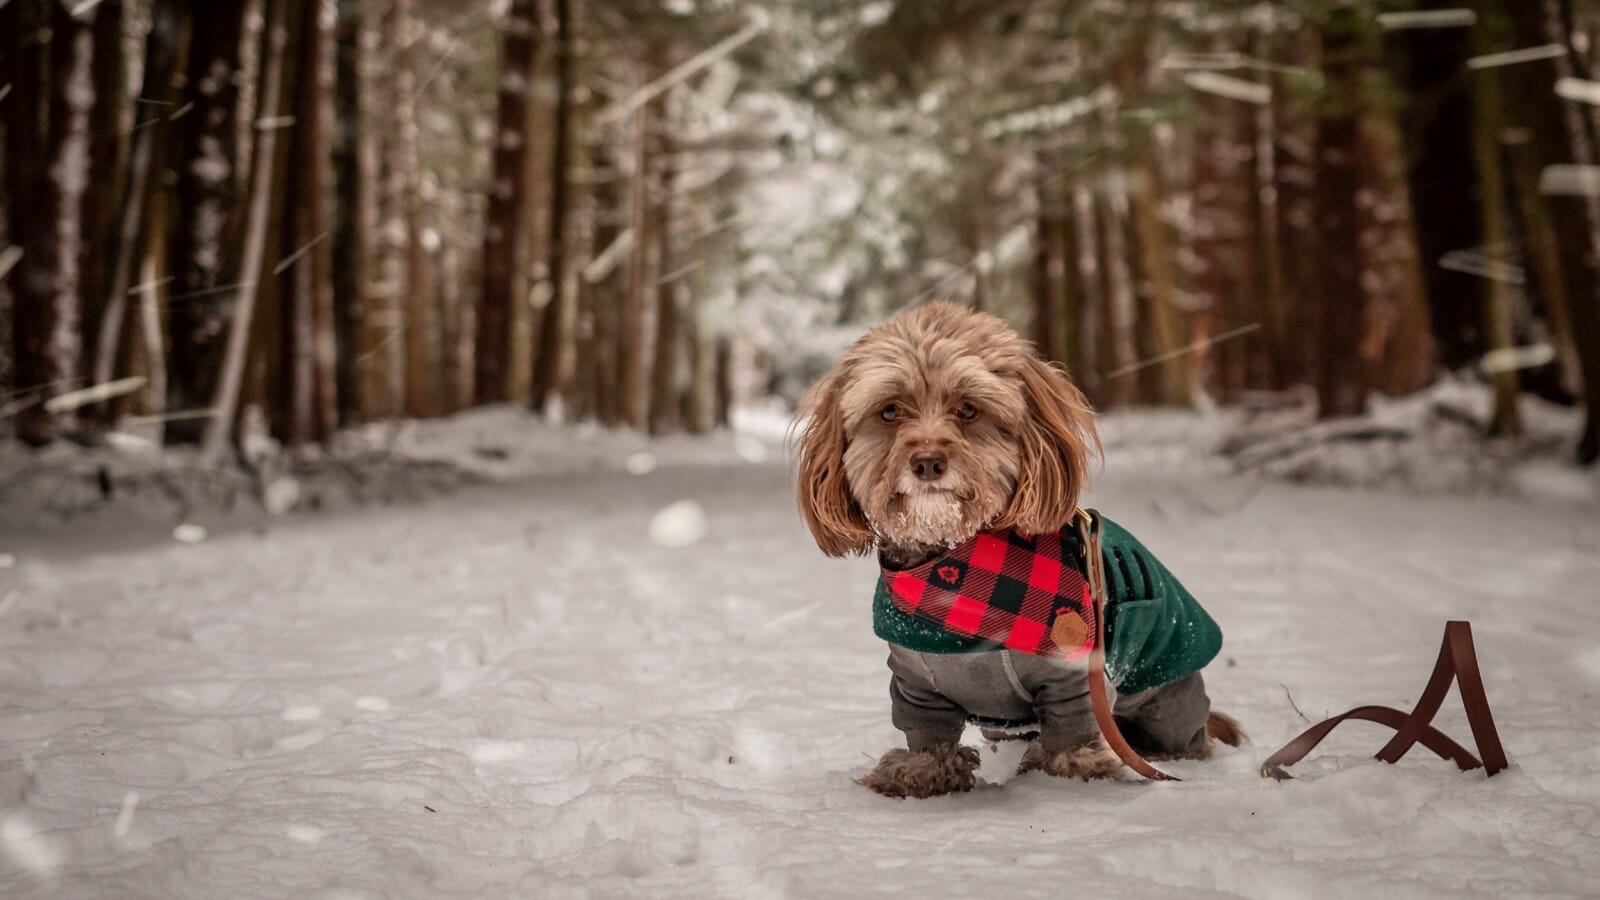 Small dog in a coat standing on a snowy forest path